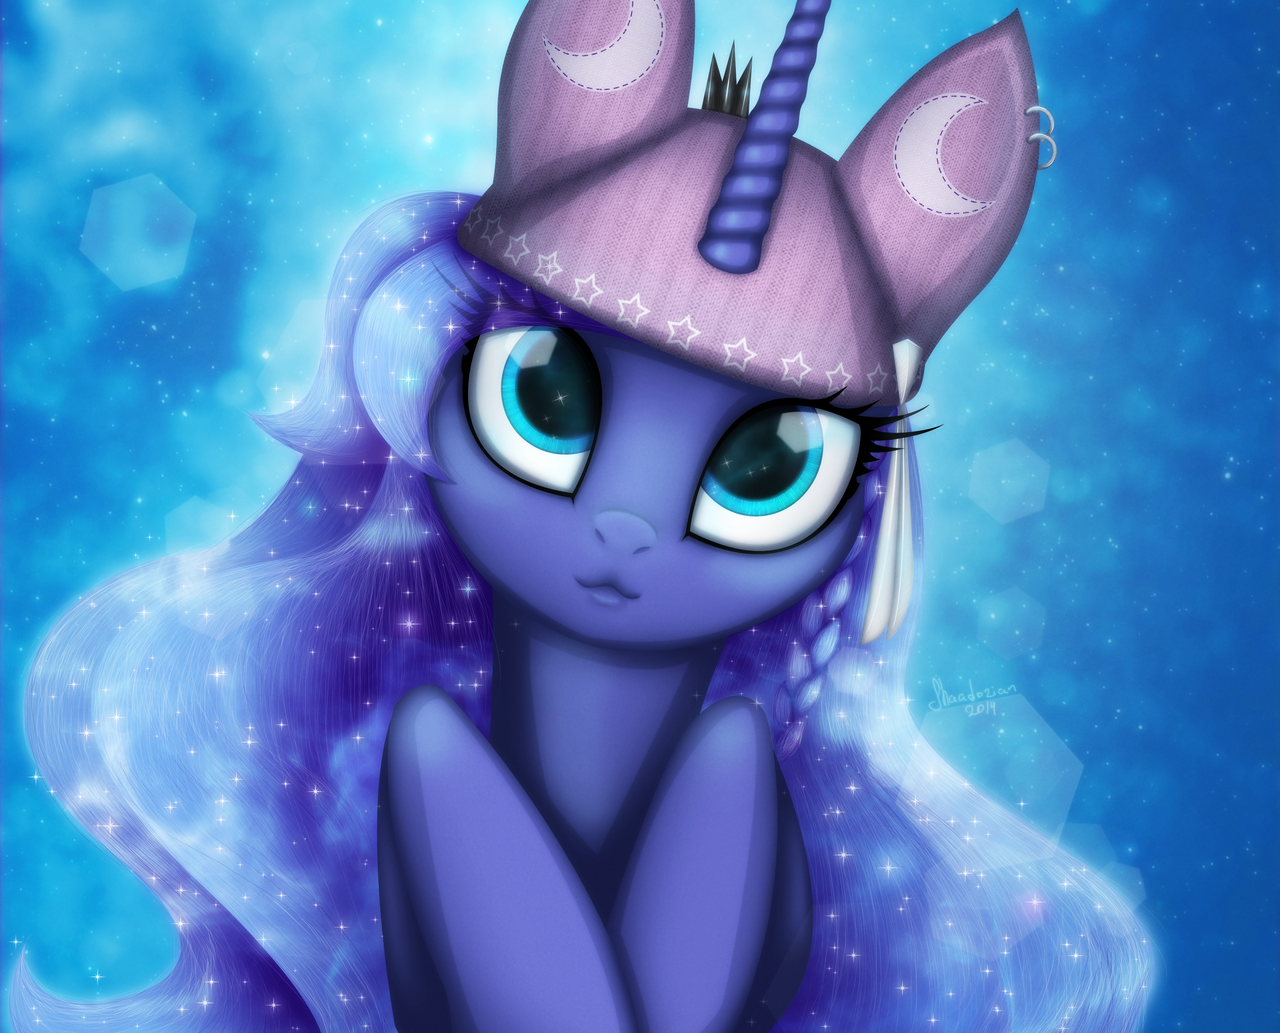 Woona in the hat by Shaadorian